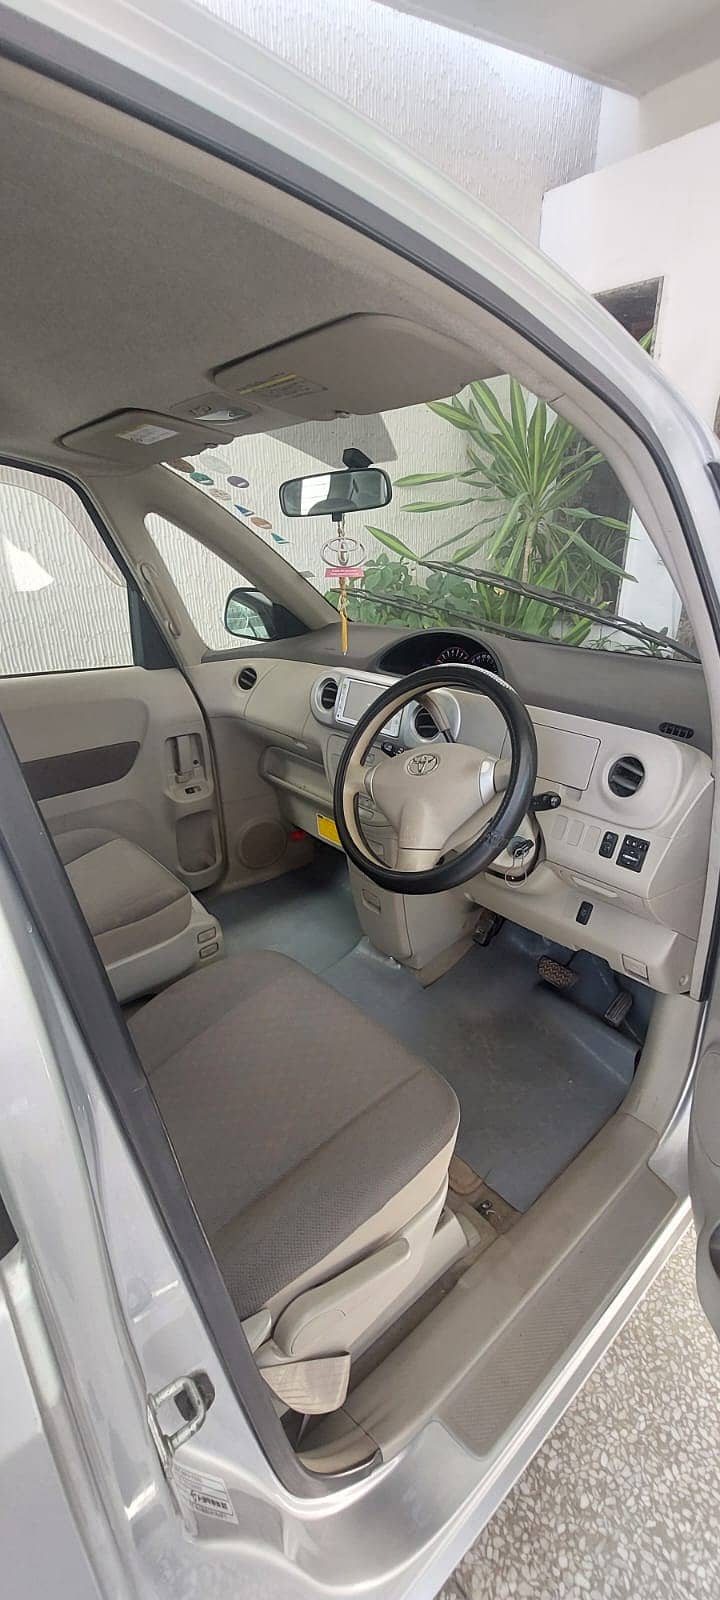 Toyota Porte 2011 with special seat for Disabled/Handicap persons 2